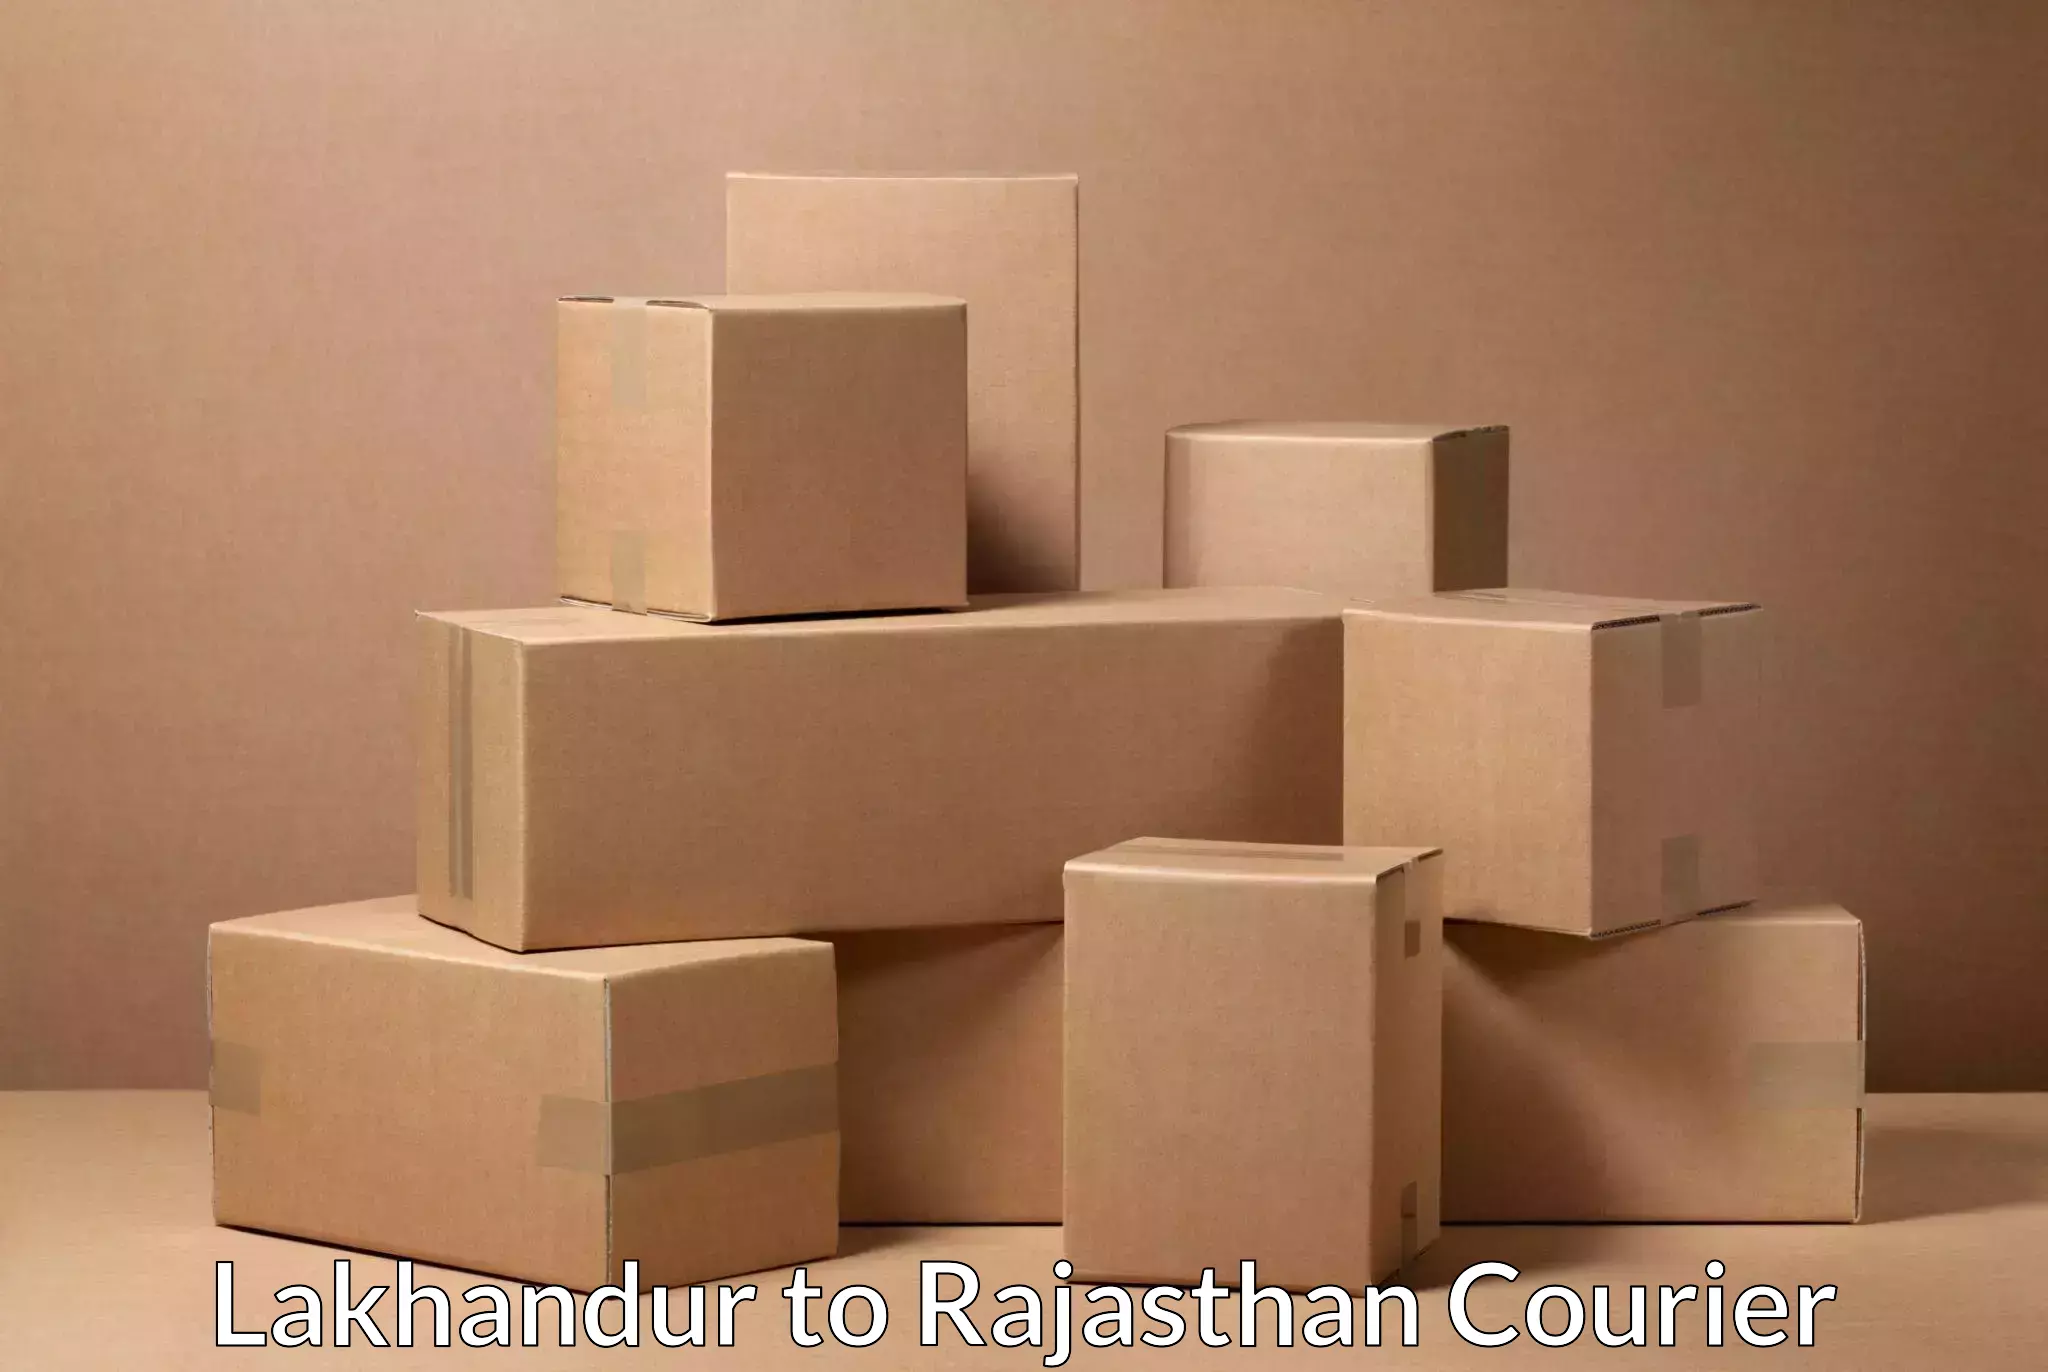 Efficient package consolidation Lakhandur to Rajasthan